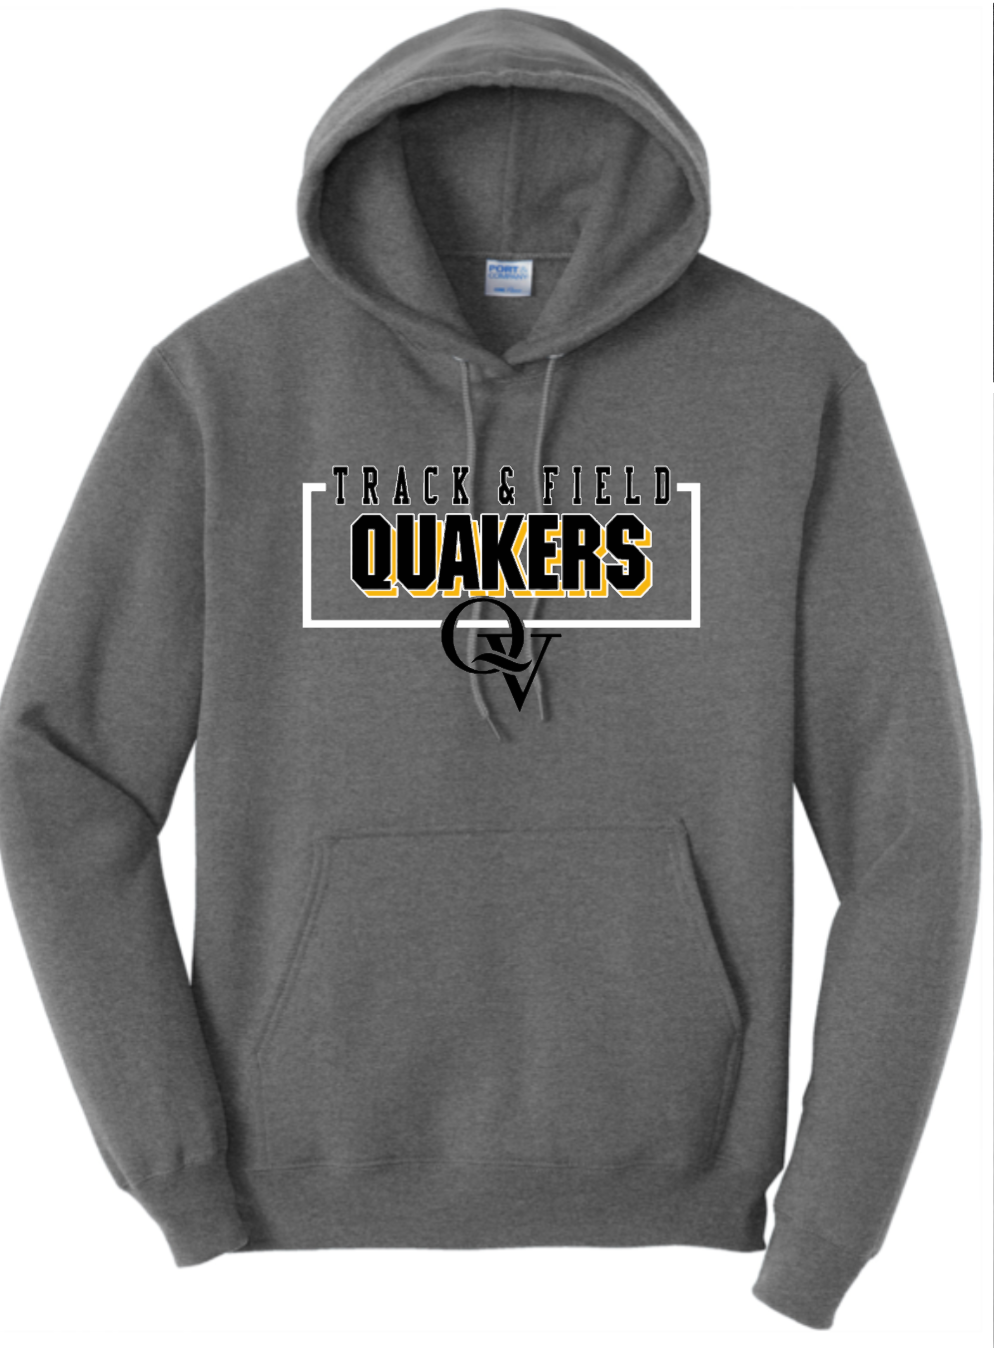 2023 FUNDRAISER - QUAKER VALLEY TRACK AND FIELD YOUTH & ADULT HOODED SWEATSHIRT